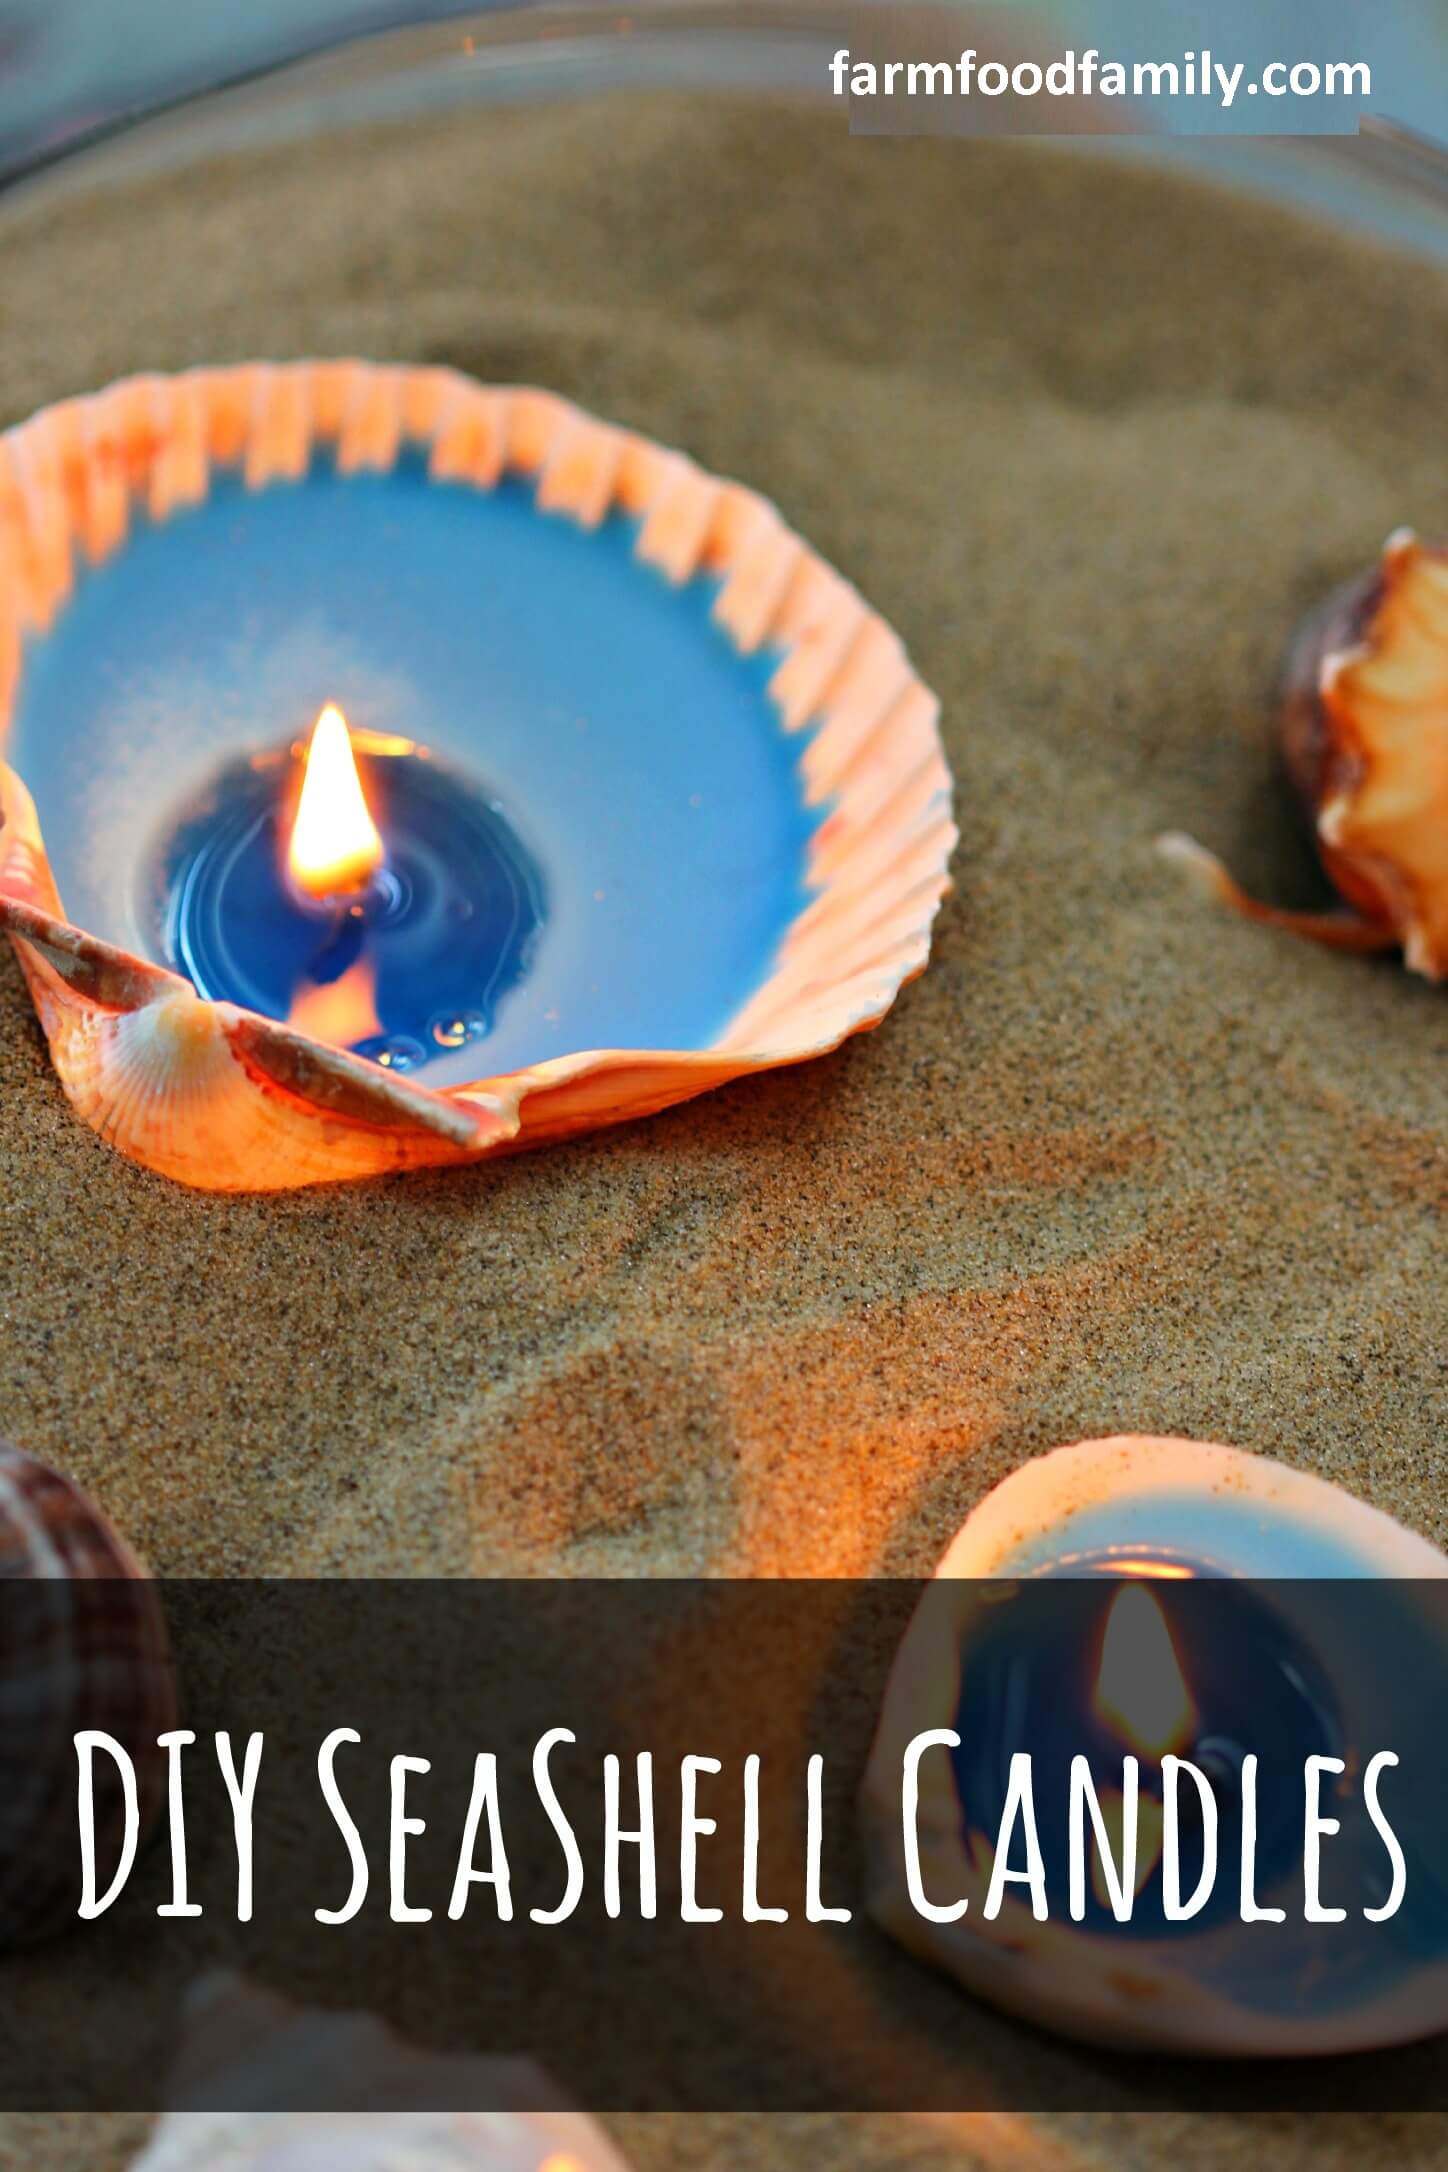 7 DIY CANDLES Article